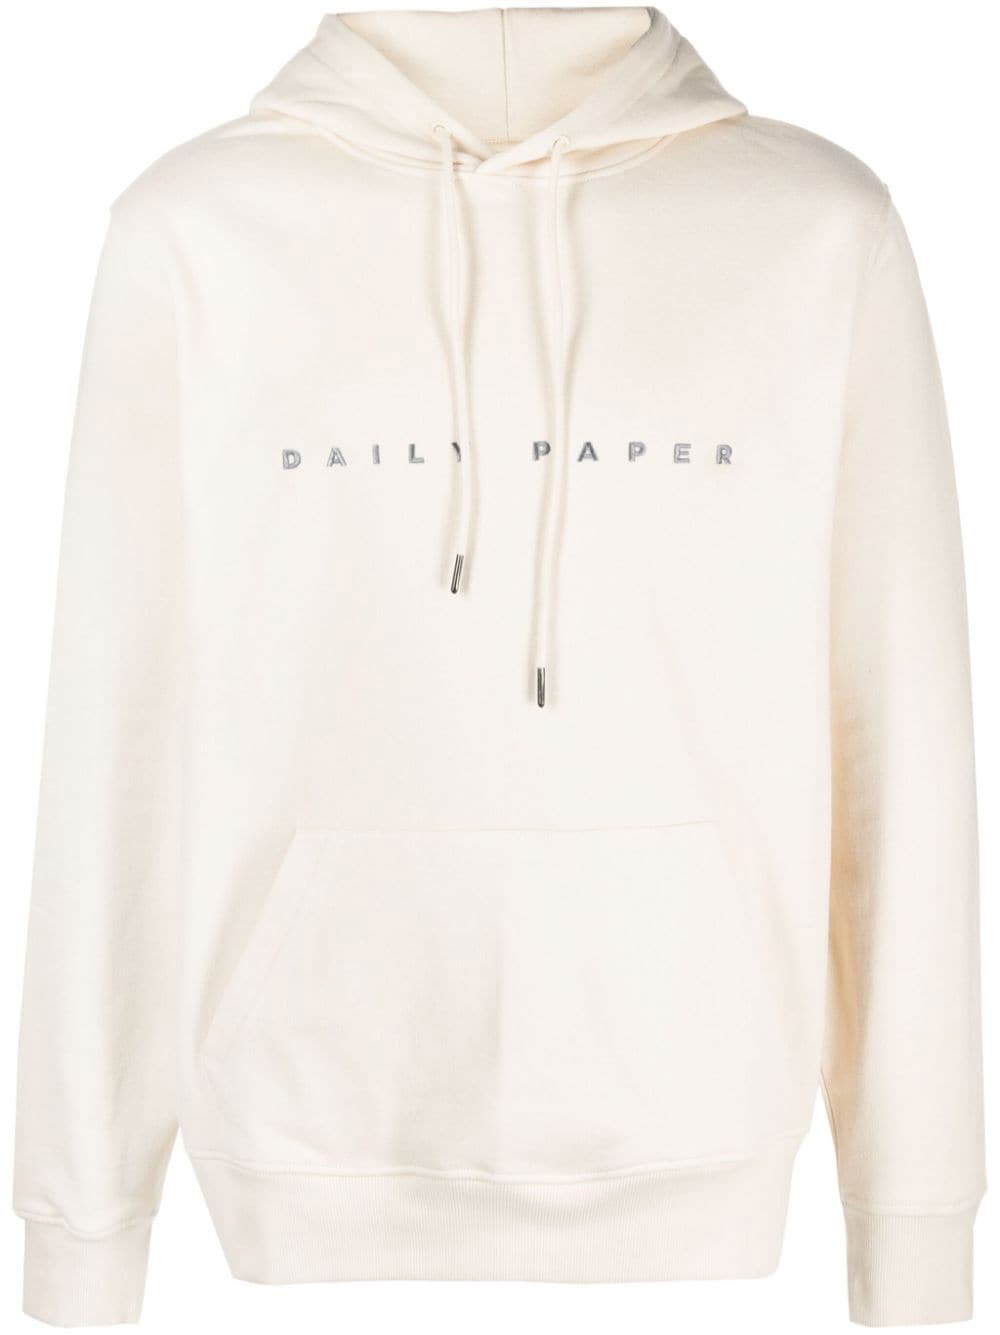 DAILY PAPER - Logo Cotton Hoodie Daily Paper